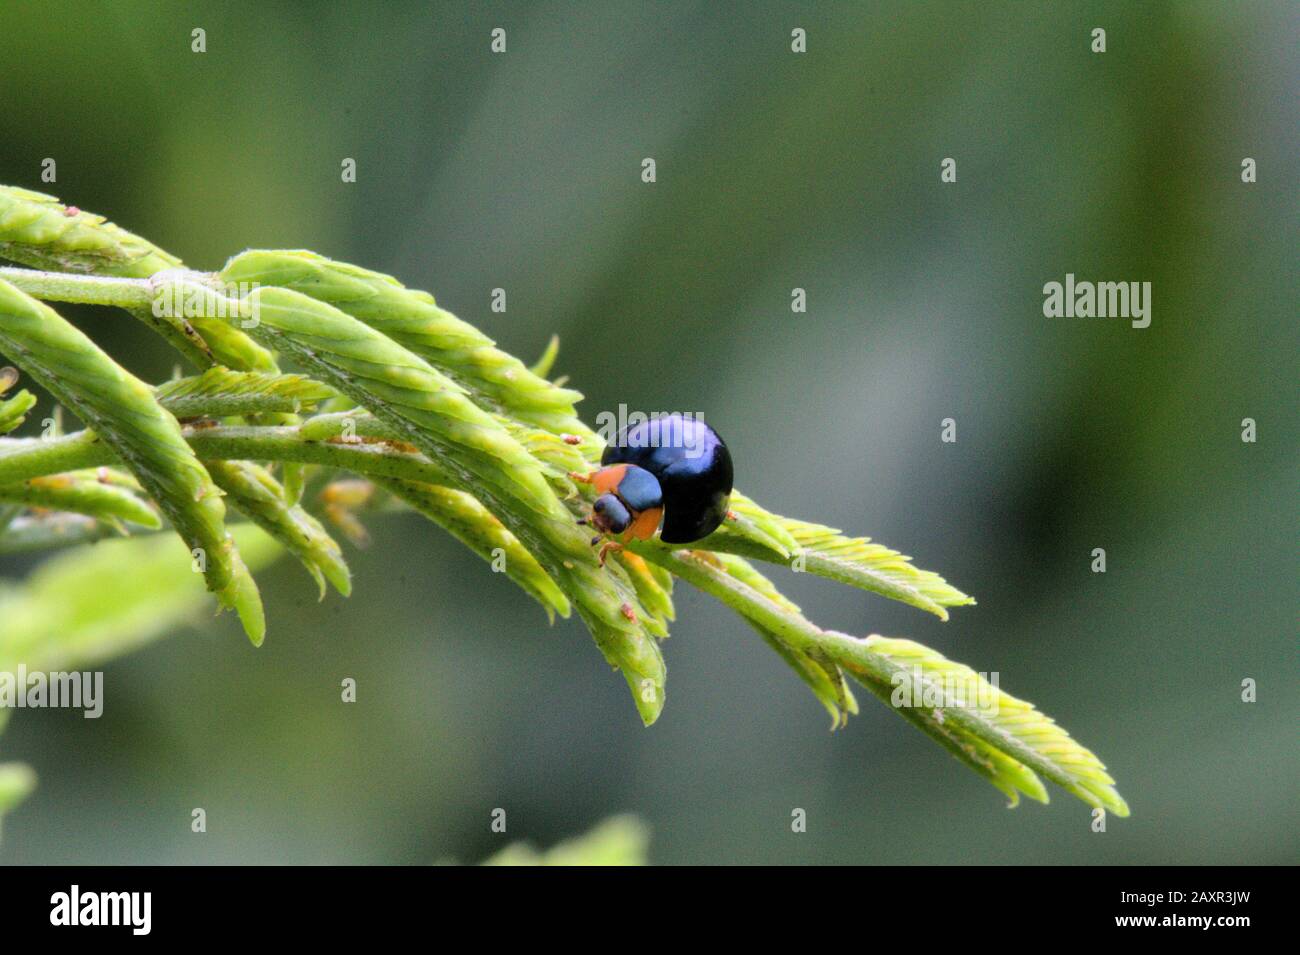 Extreme close-up of a blue ladybird beetle. Stock Photo